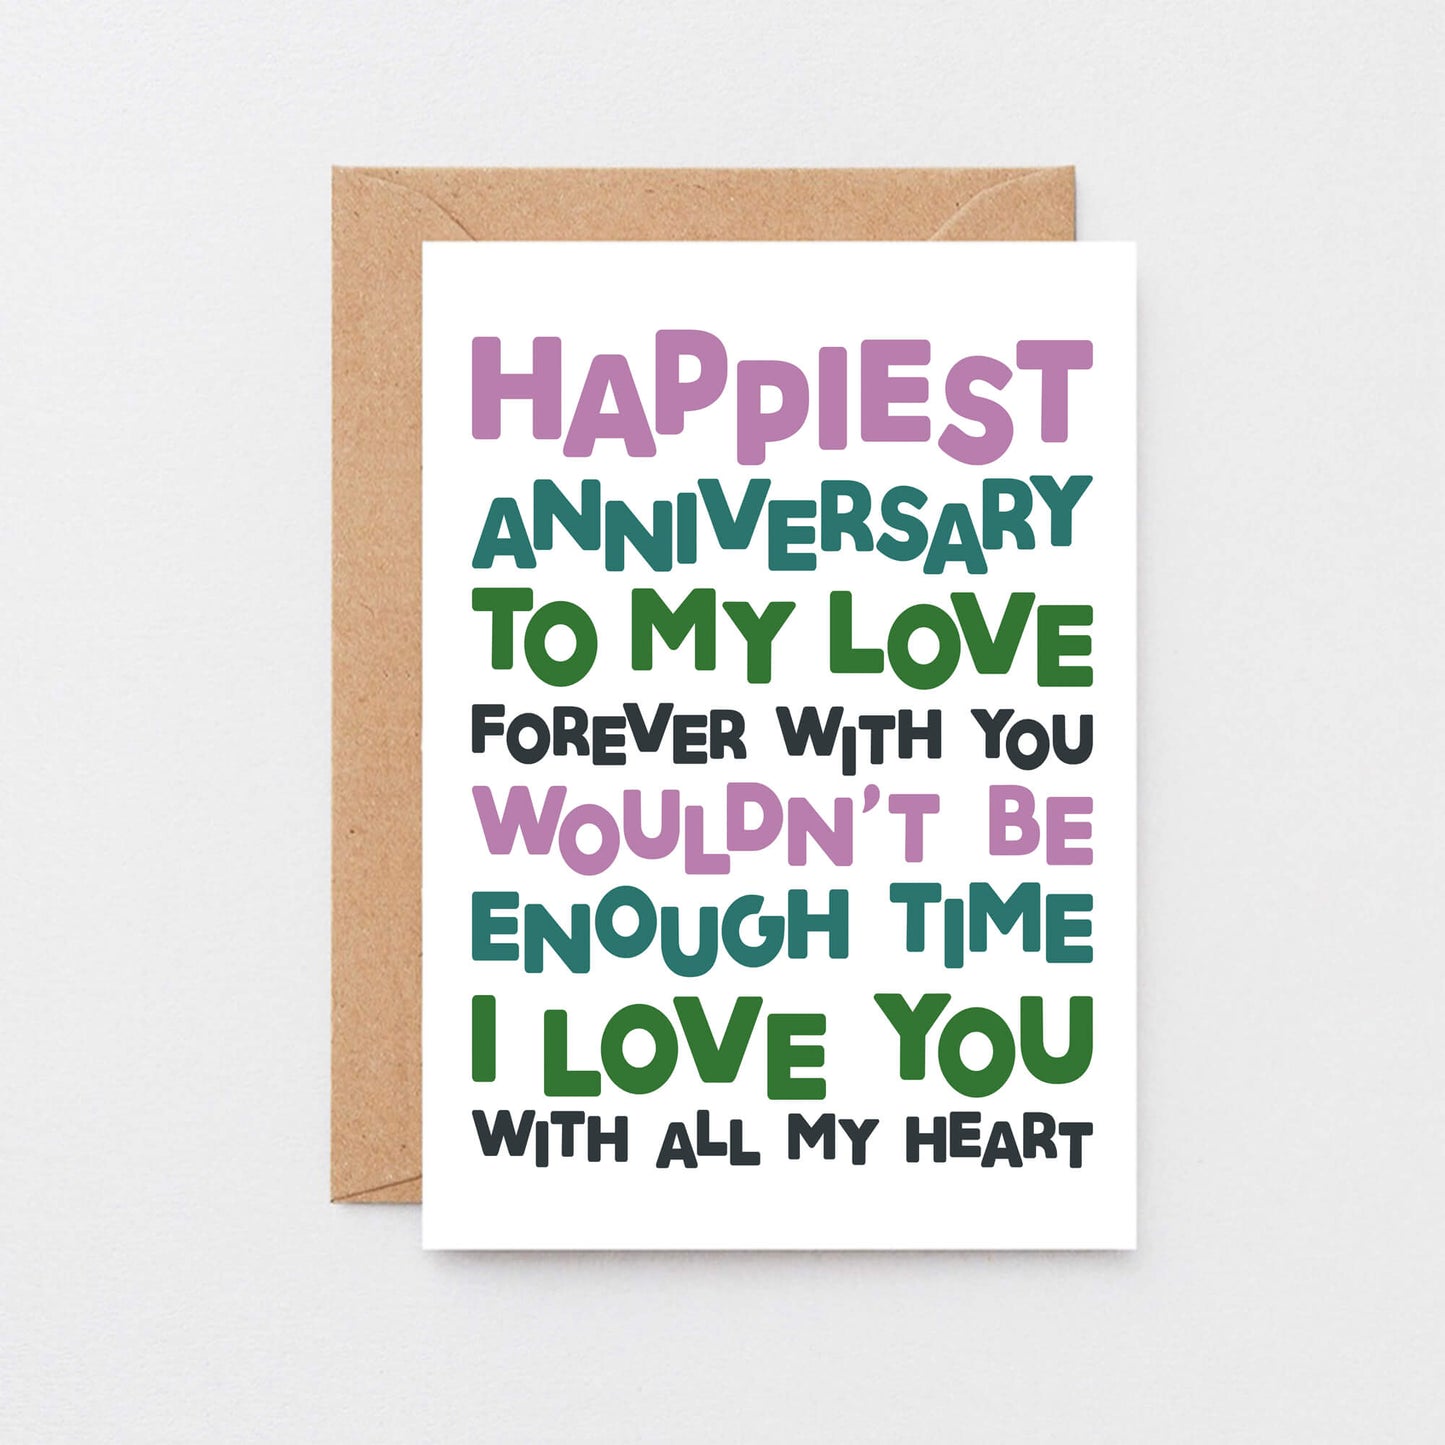 Anniversary Card by SixElevenCreations. Reads Happiest Anniversary to my love. Forever with you wouldn't be enough time. I love you with all my heart. Product Code SE0709A6